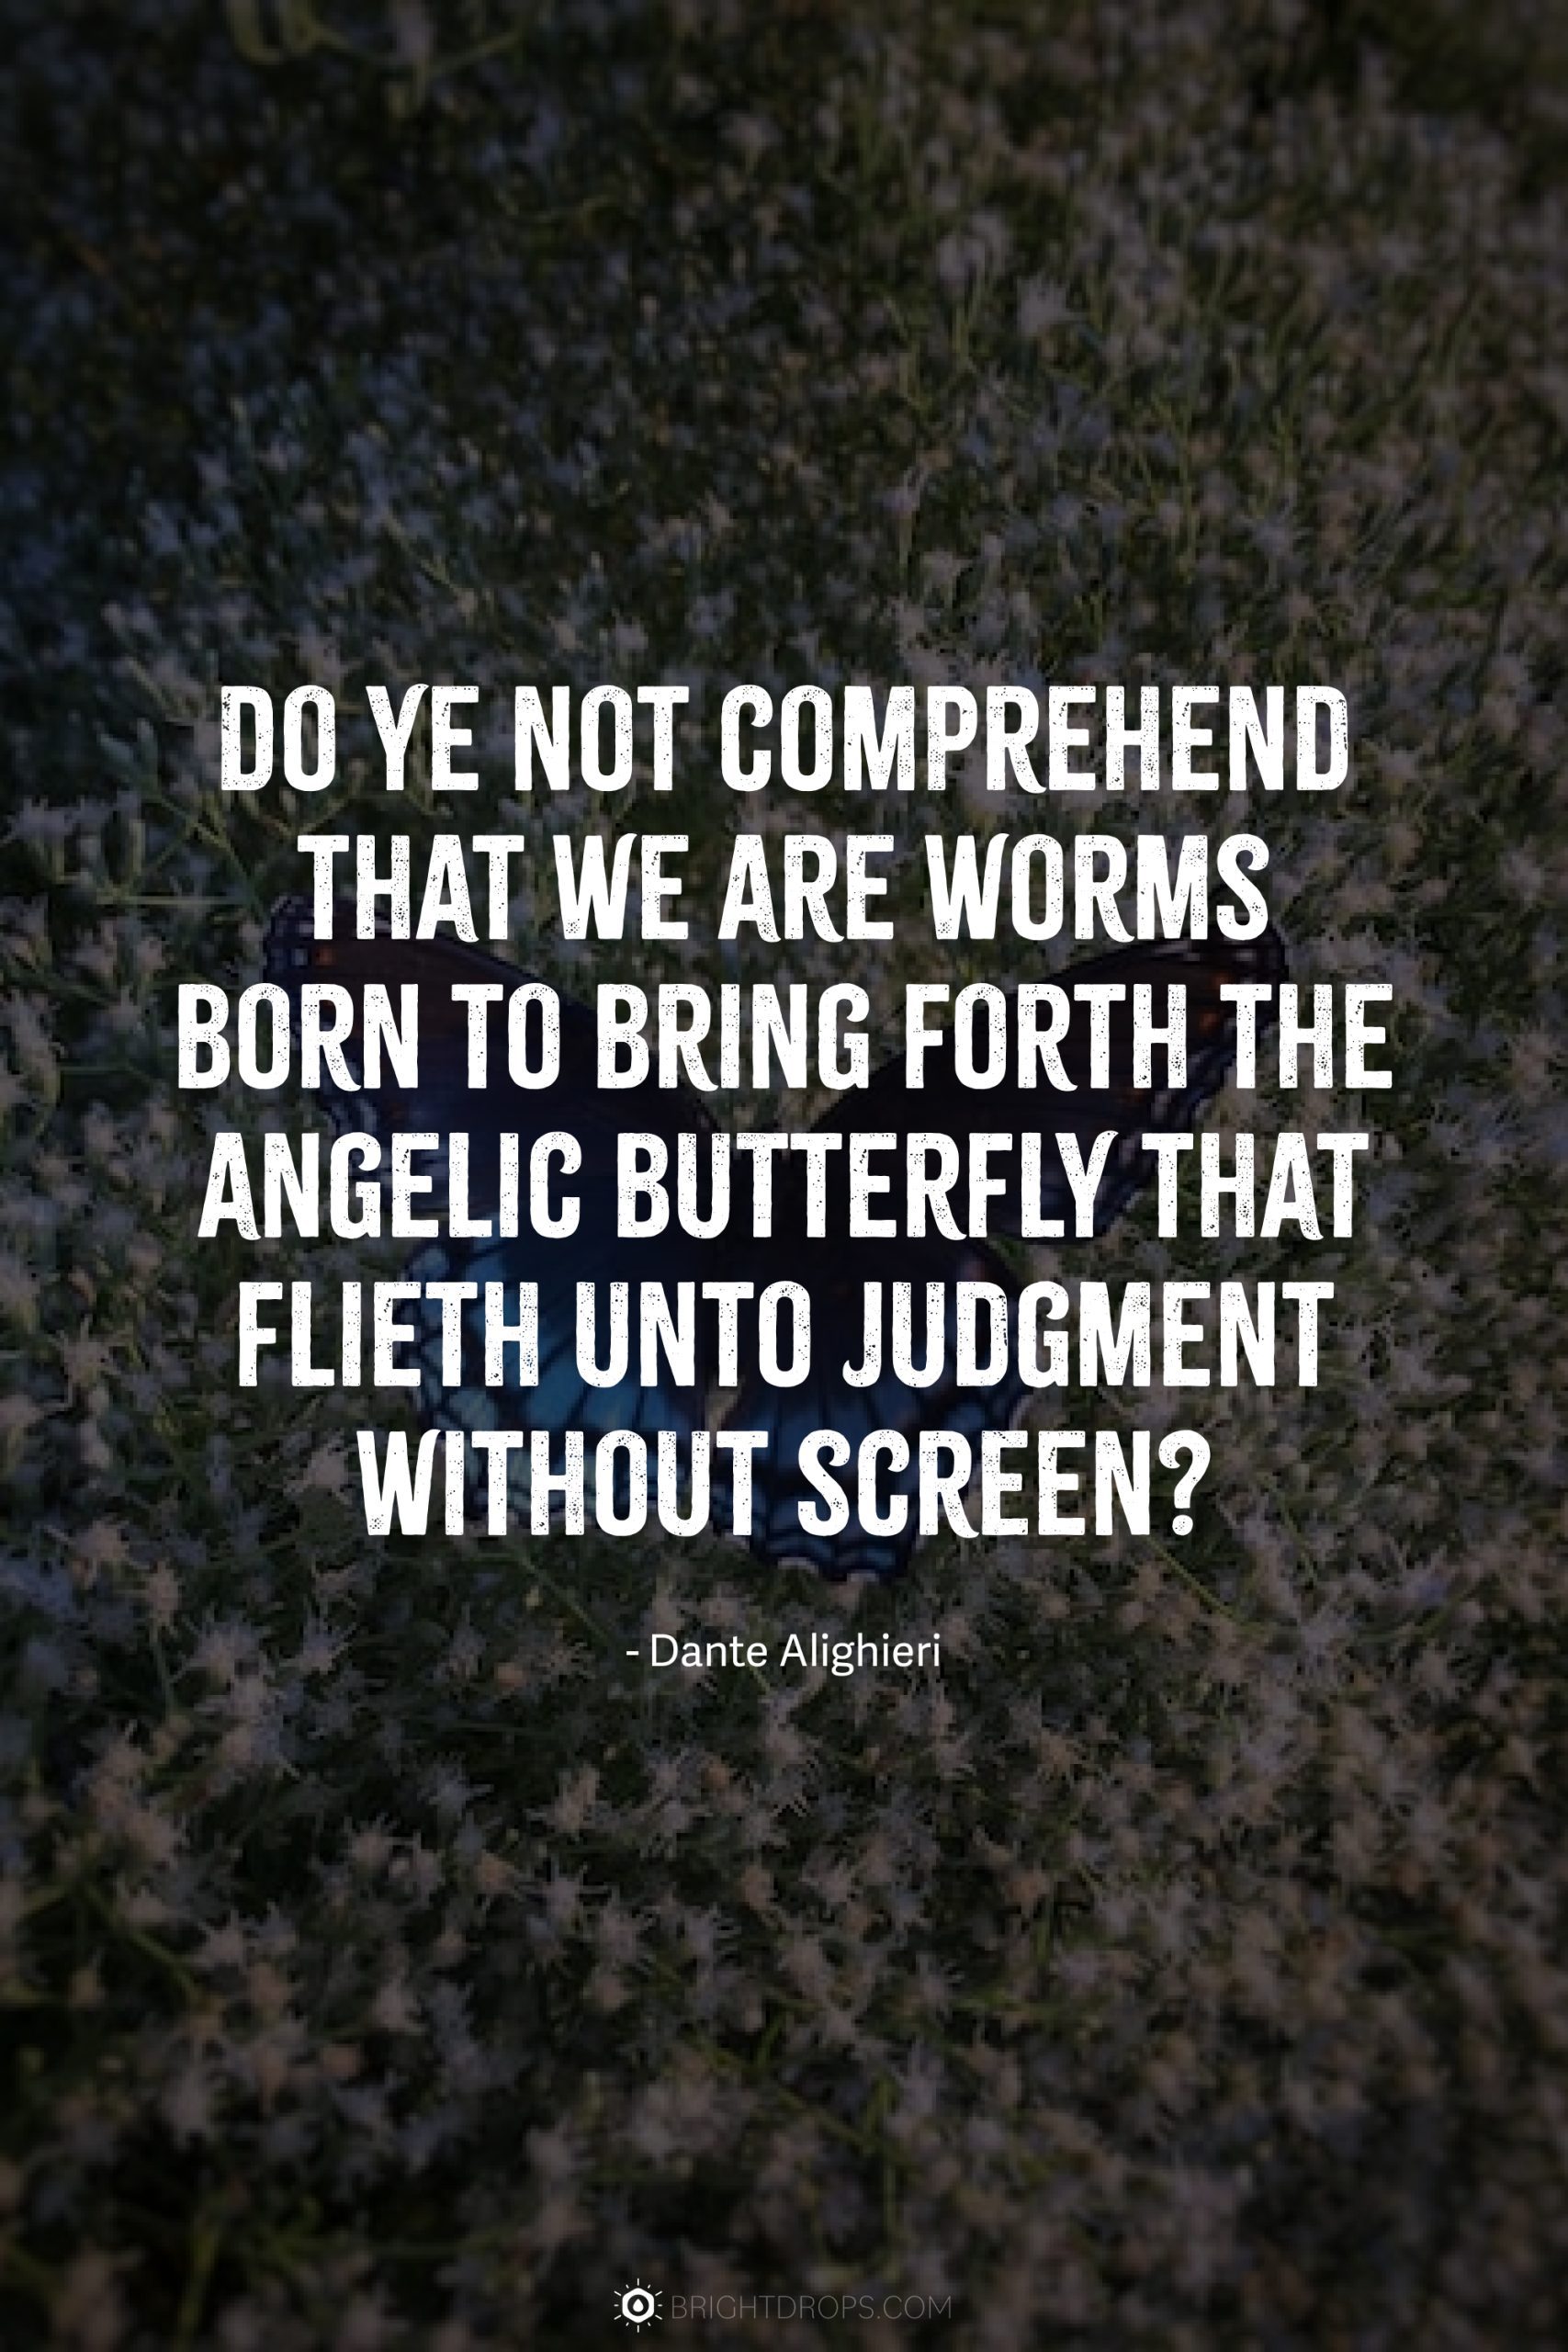 Do ye not comprehend that we are worms born to bring forth the angelic butterfly that flieth unto judgment without screen?